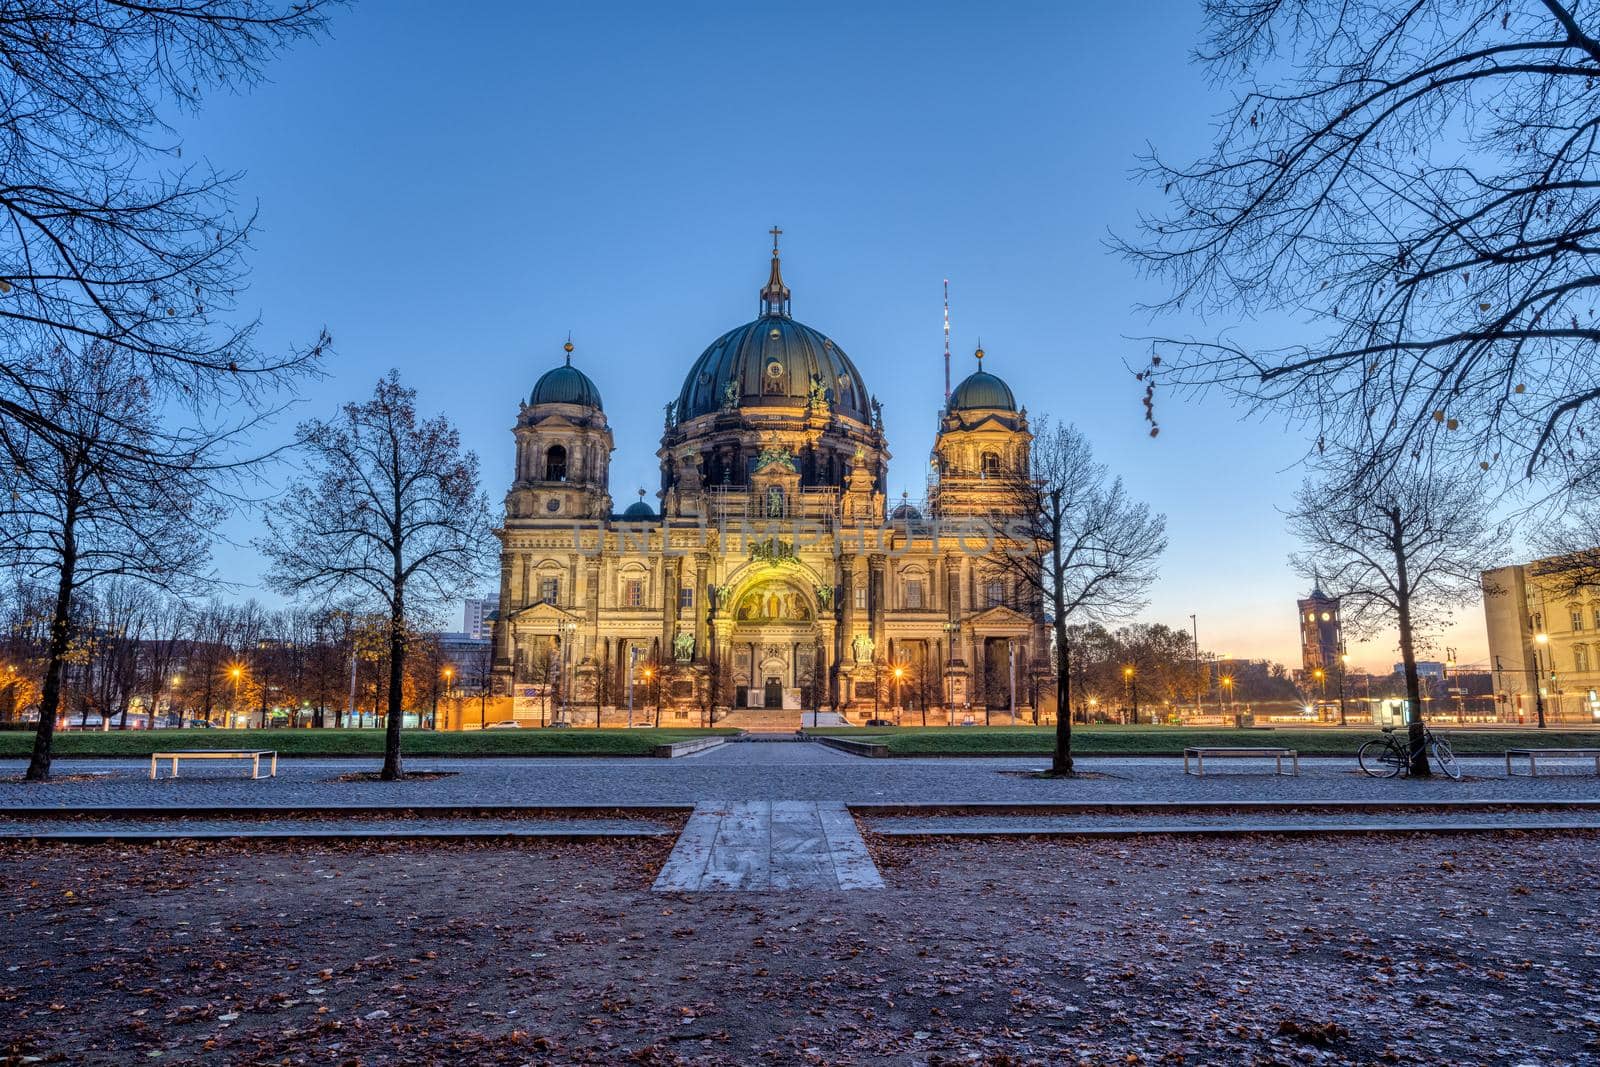 The illuminated Berlin Cathedral in autumn with some barren trees before sunrise